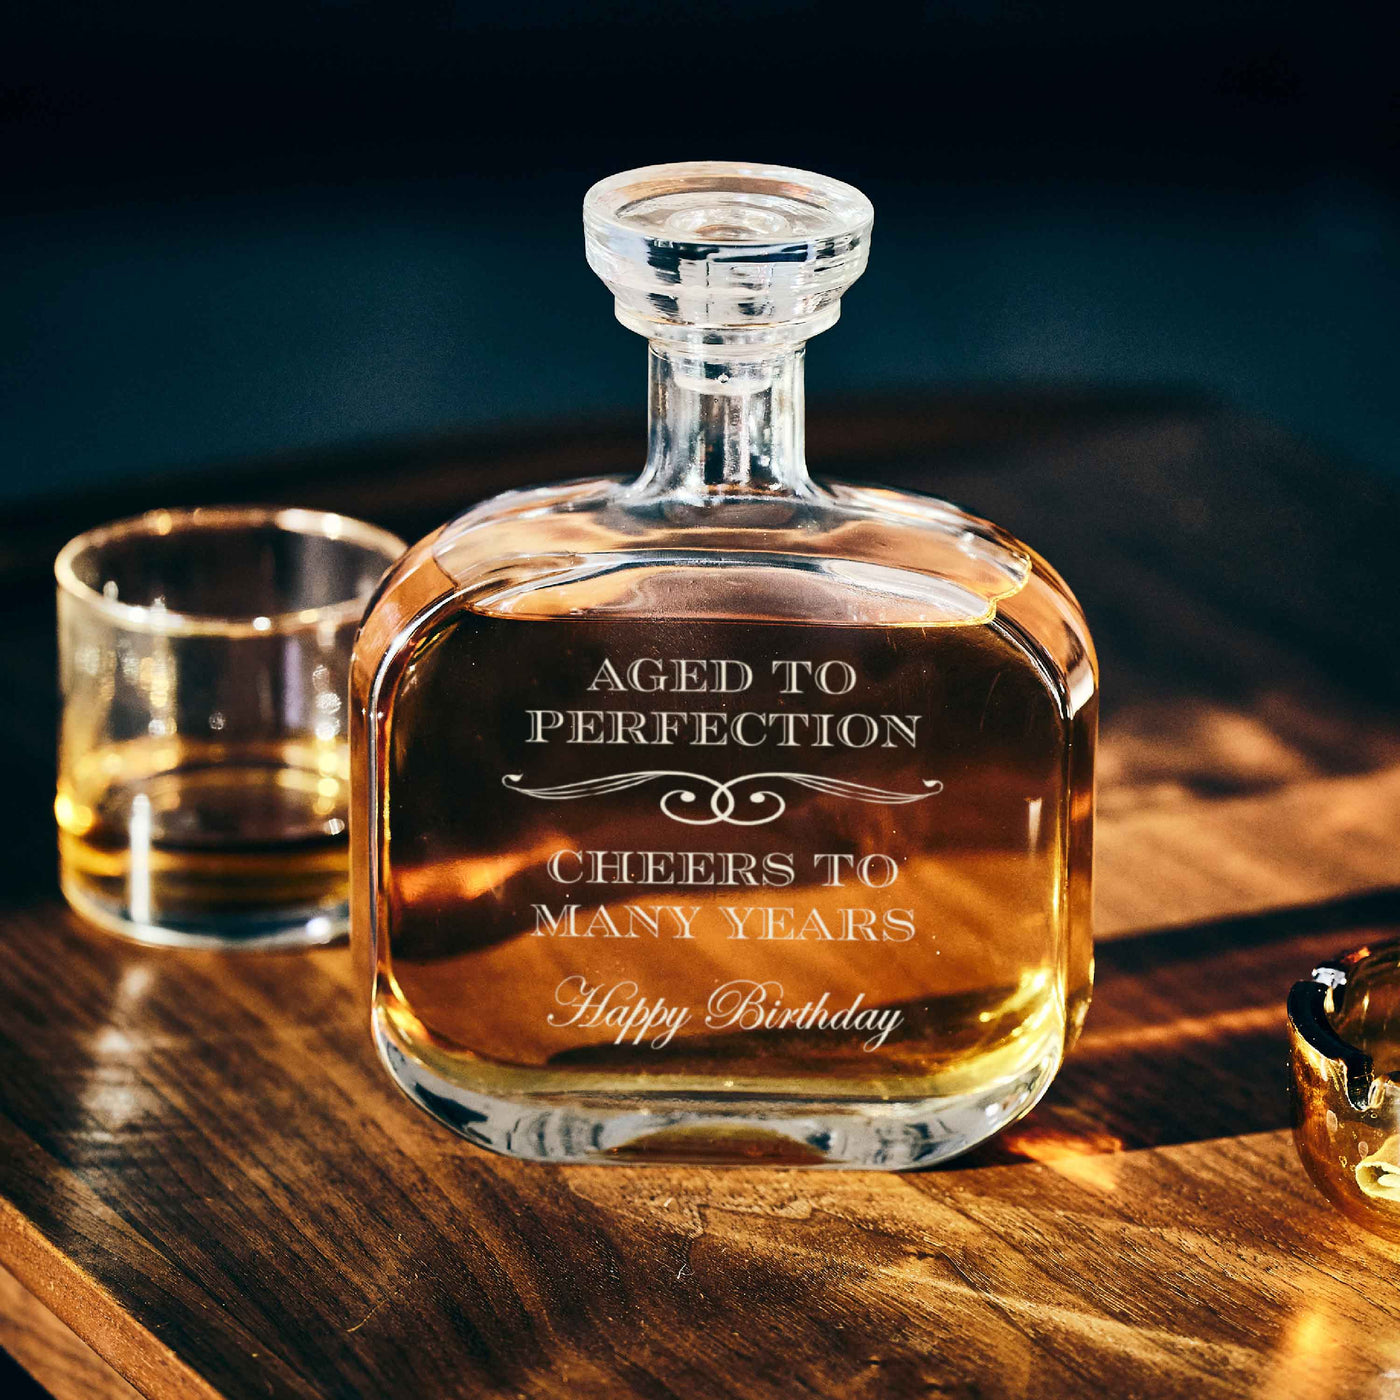 Birthday Decanter "Aged to Perfection" Prestige Bottle